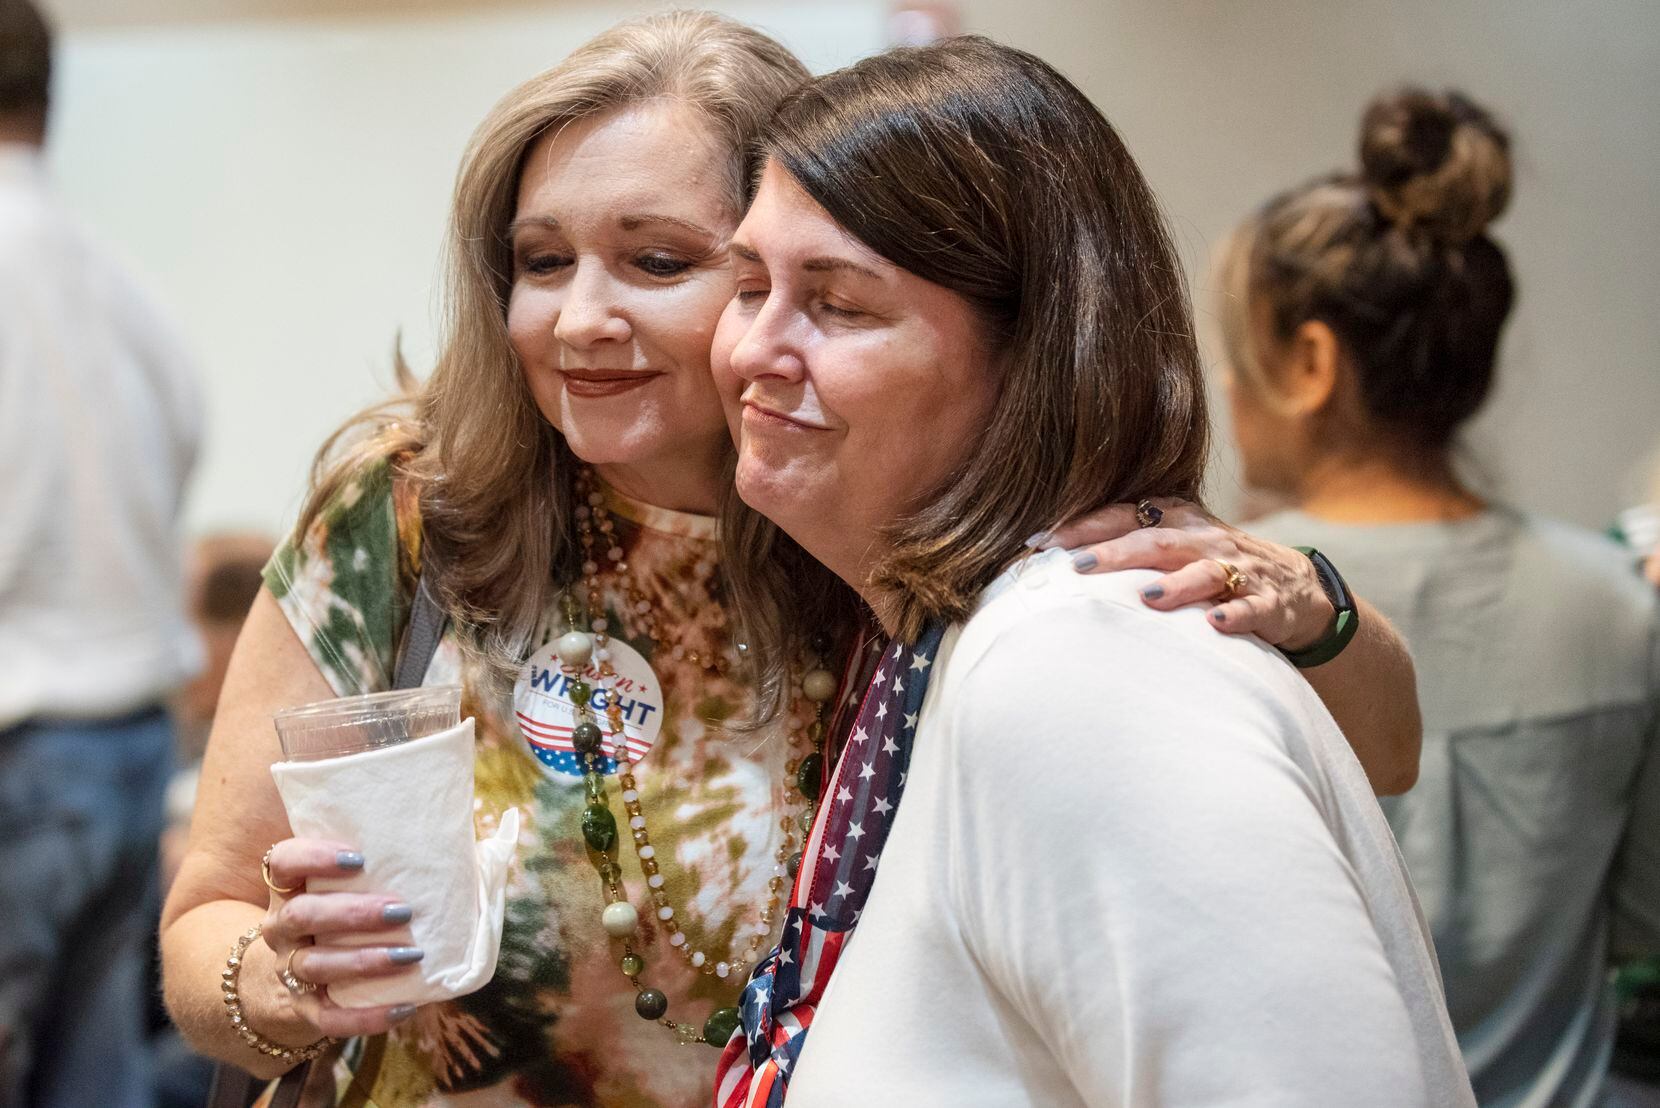 Susan Wright (right), 6th Congressional District candidate, was hugged by friend and Republican supporter Richelle Smithee as Wright met with friends and family during an election night watch party at the Courtyard by Marriott hotel in Arlington on Tuesday.